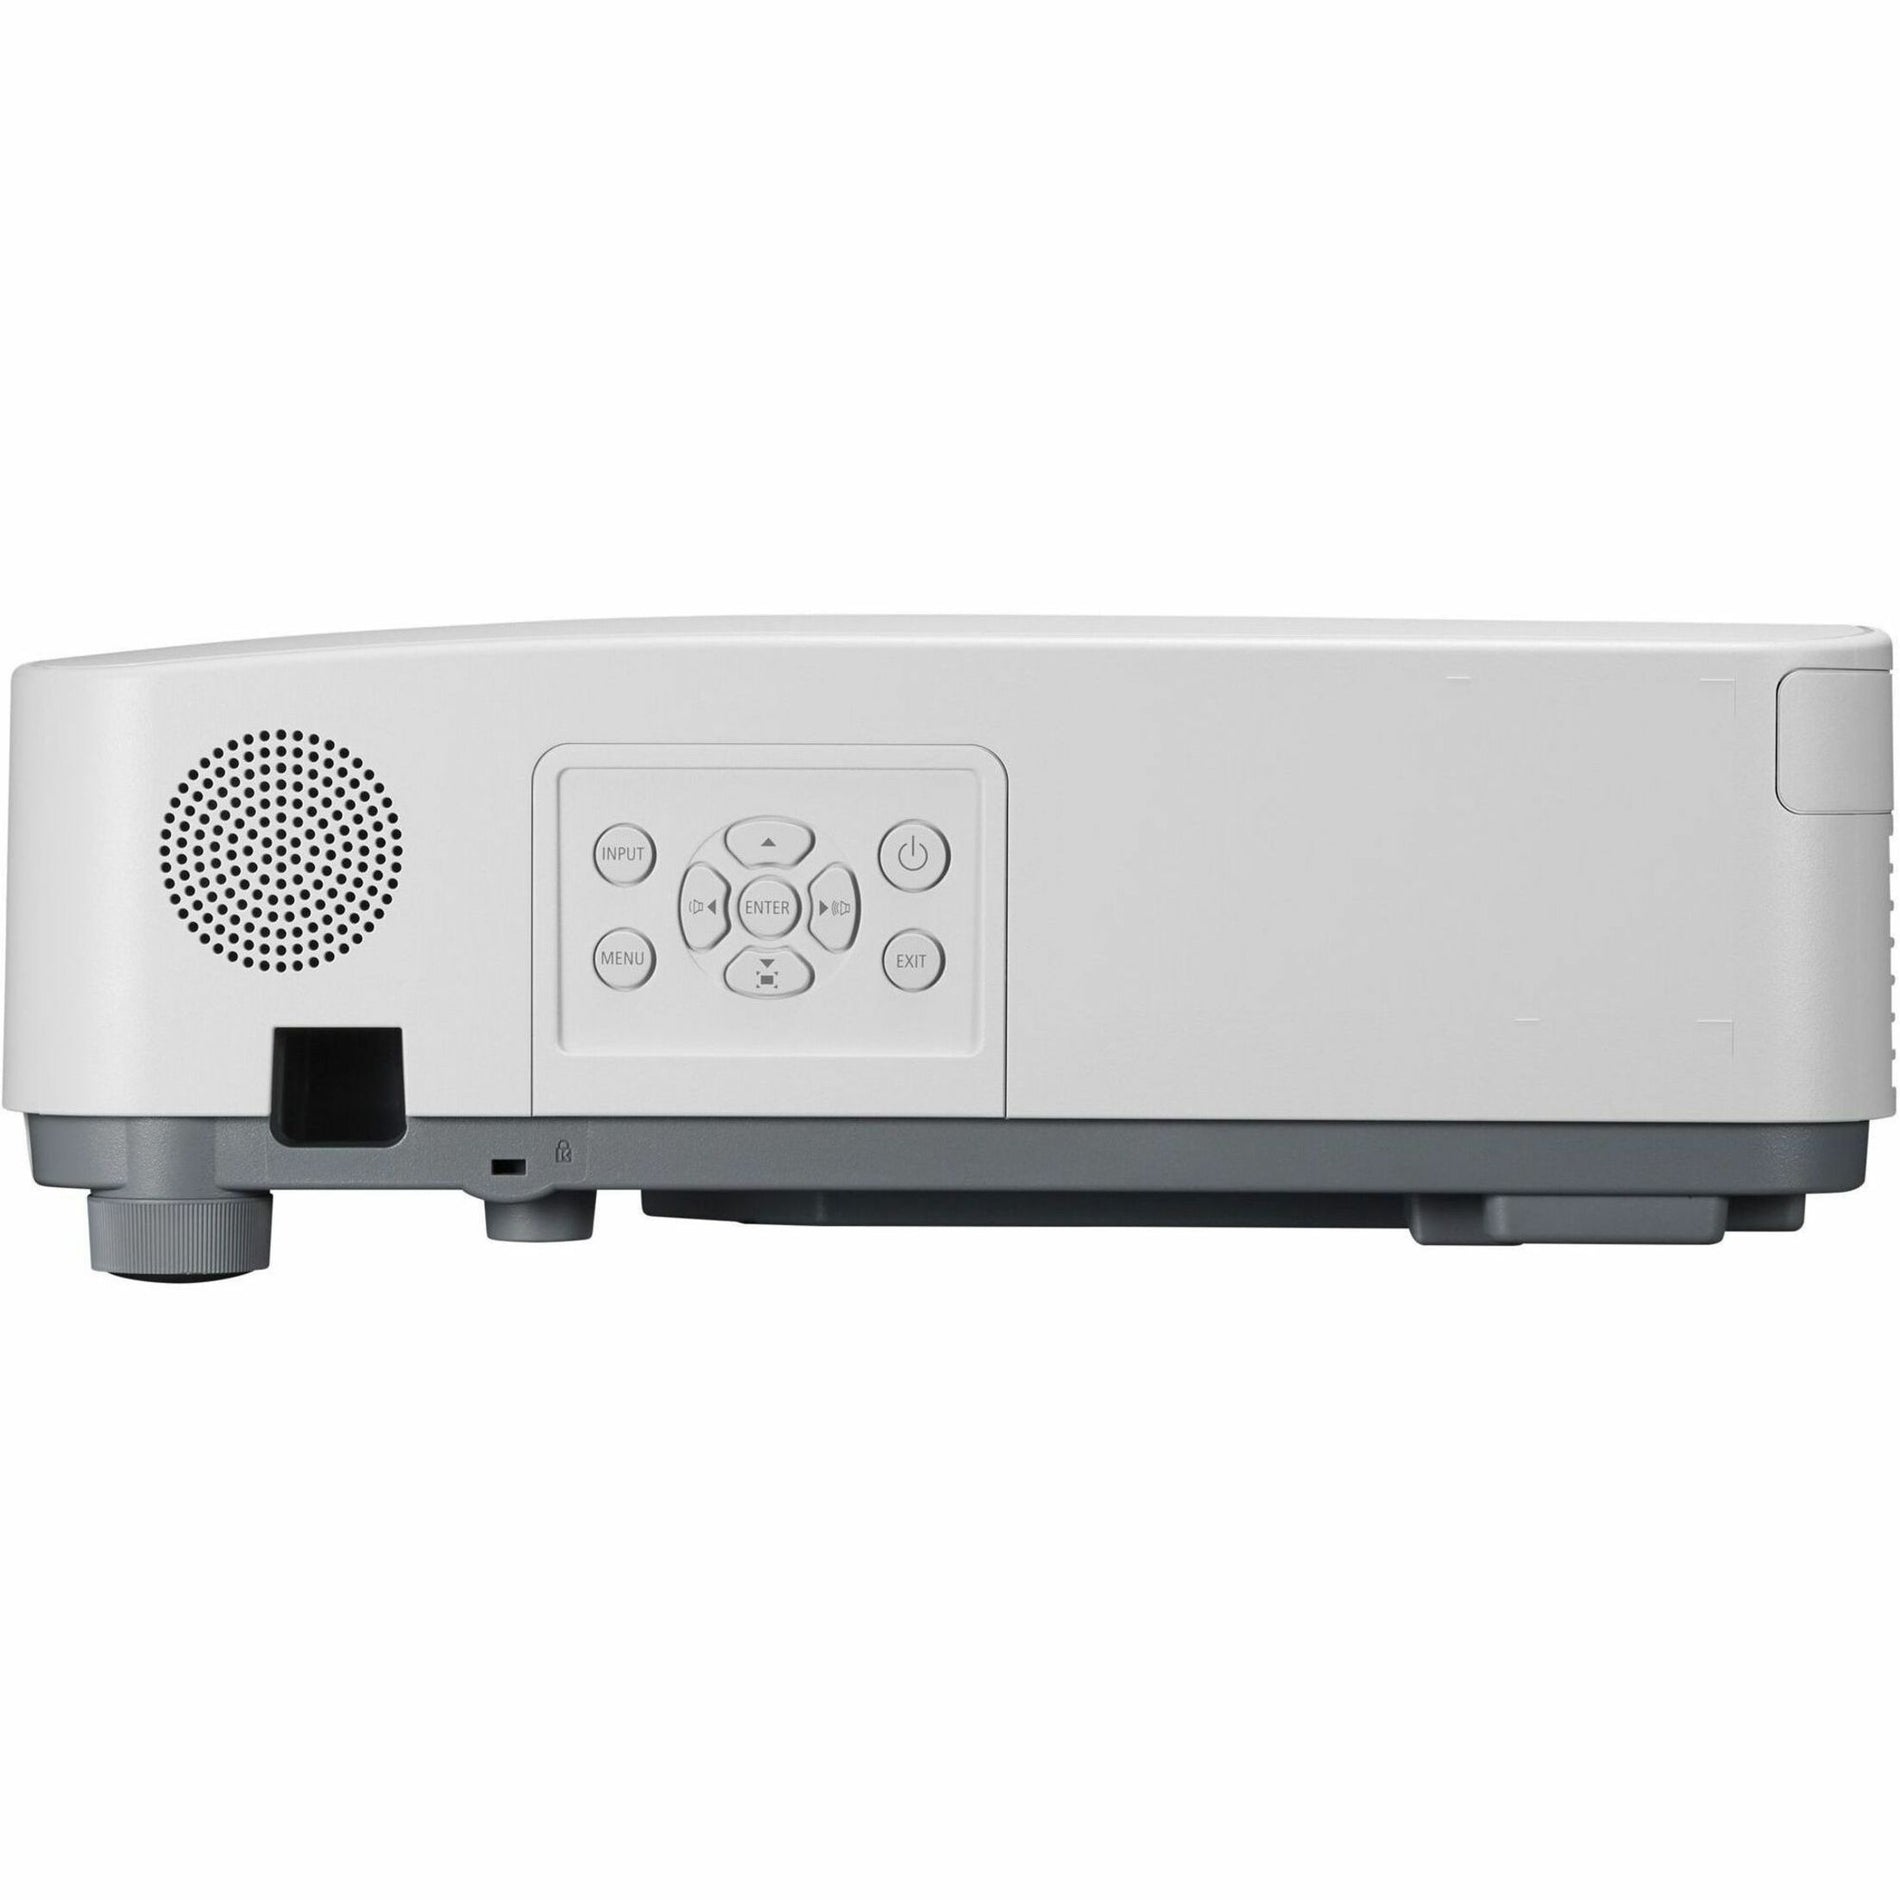 Sharp NEC Display NP-P547UL 5,400 Lumen, WUXGA, Laser, LCD Projector, Ideal for Education, Presentation, and Large Venue